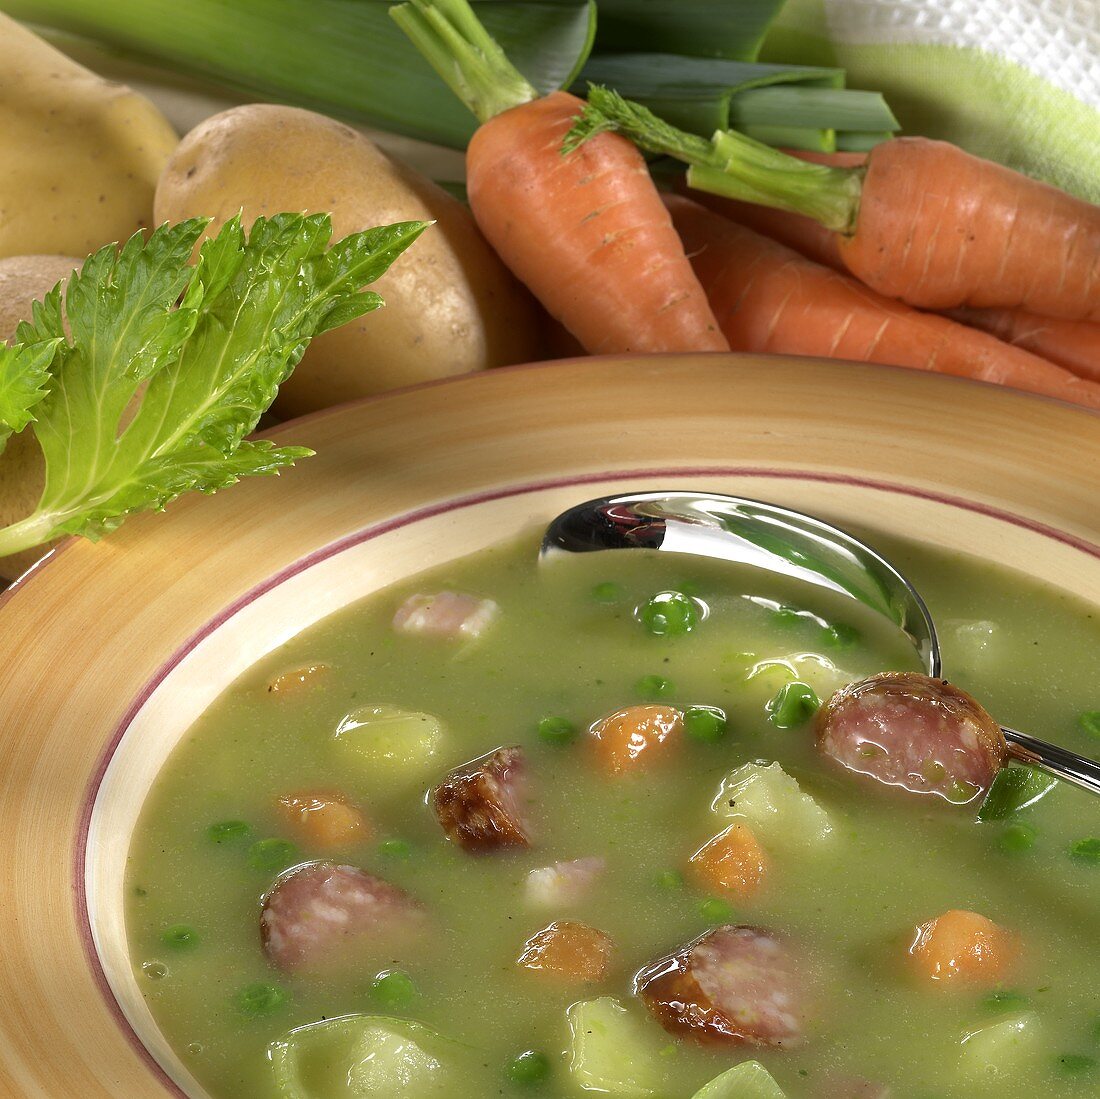 Pea soup with potatoes and sausage slices